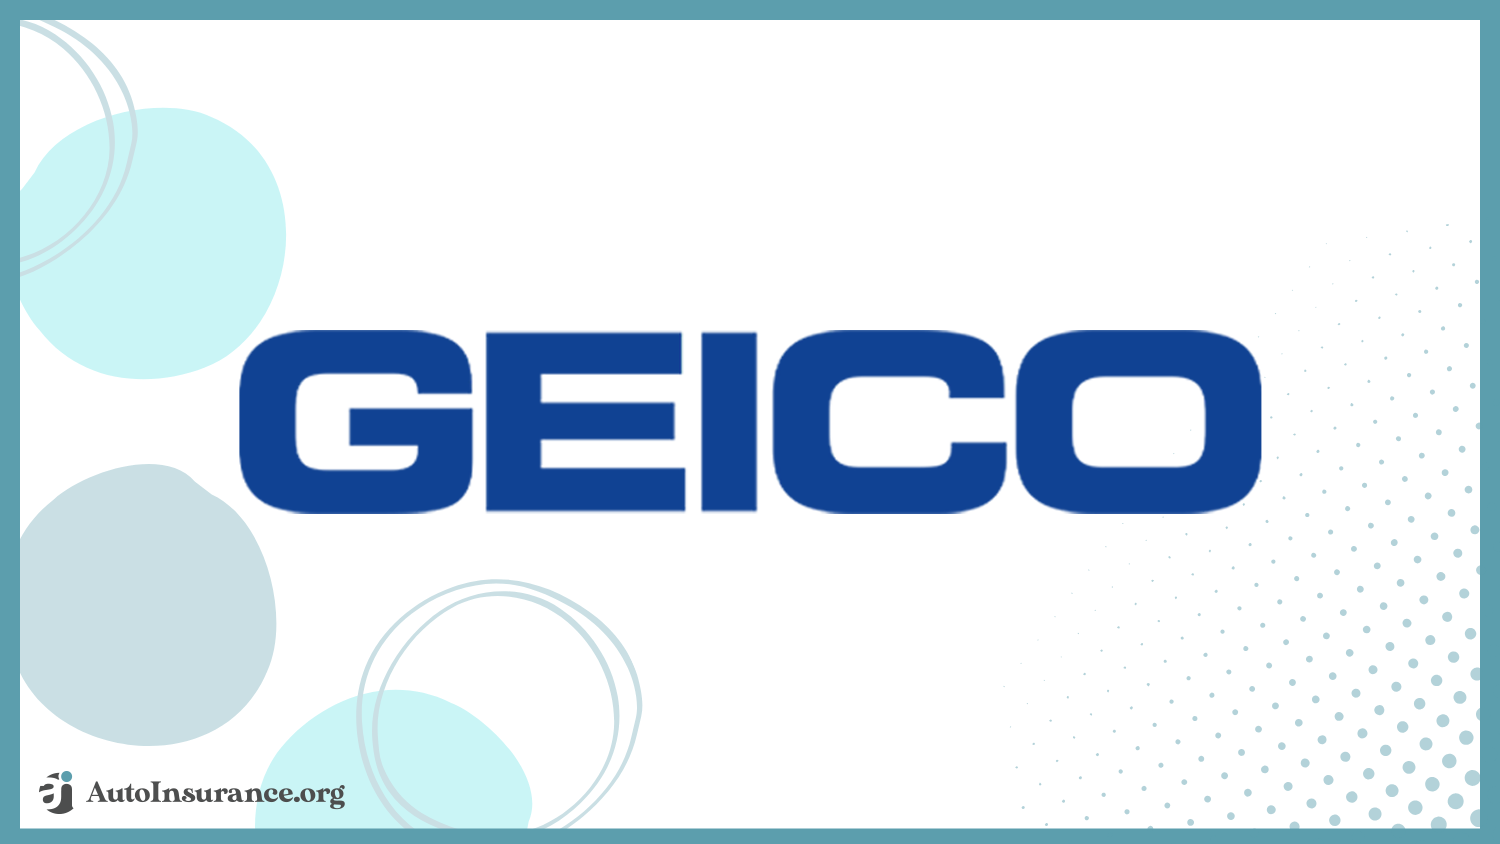 Geico: Best Auto Insurance for Families